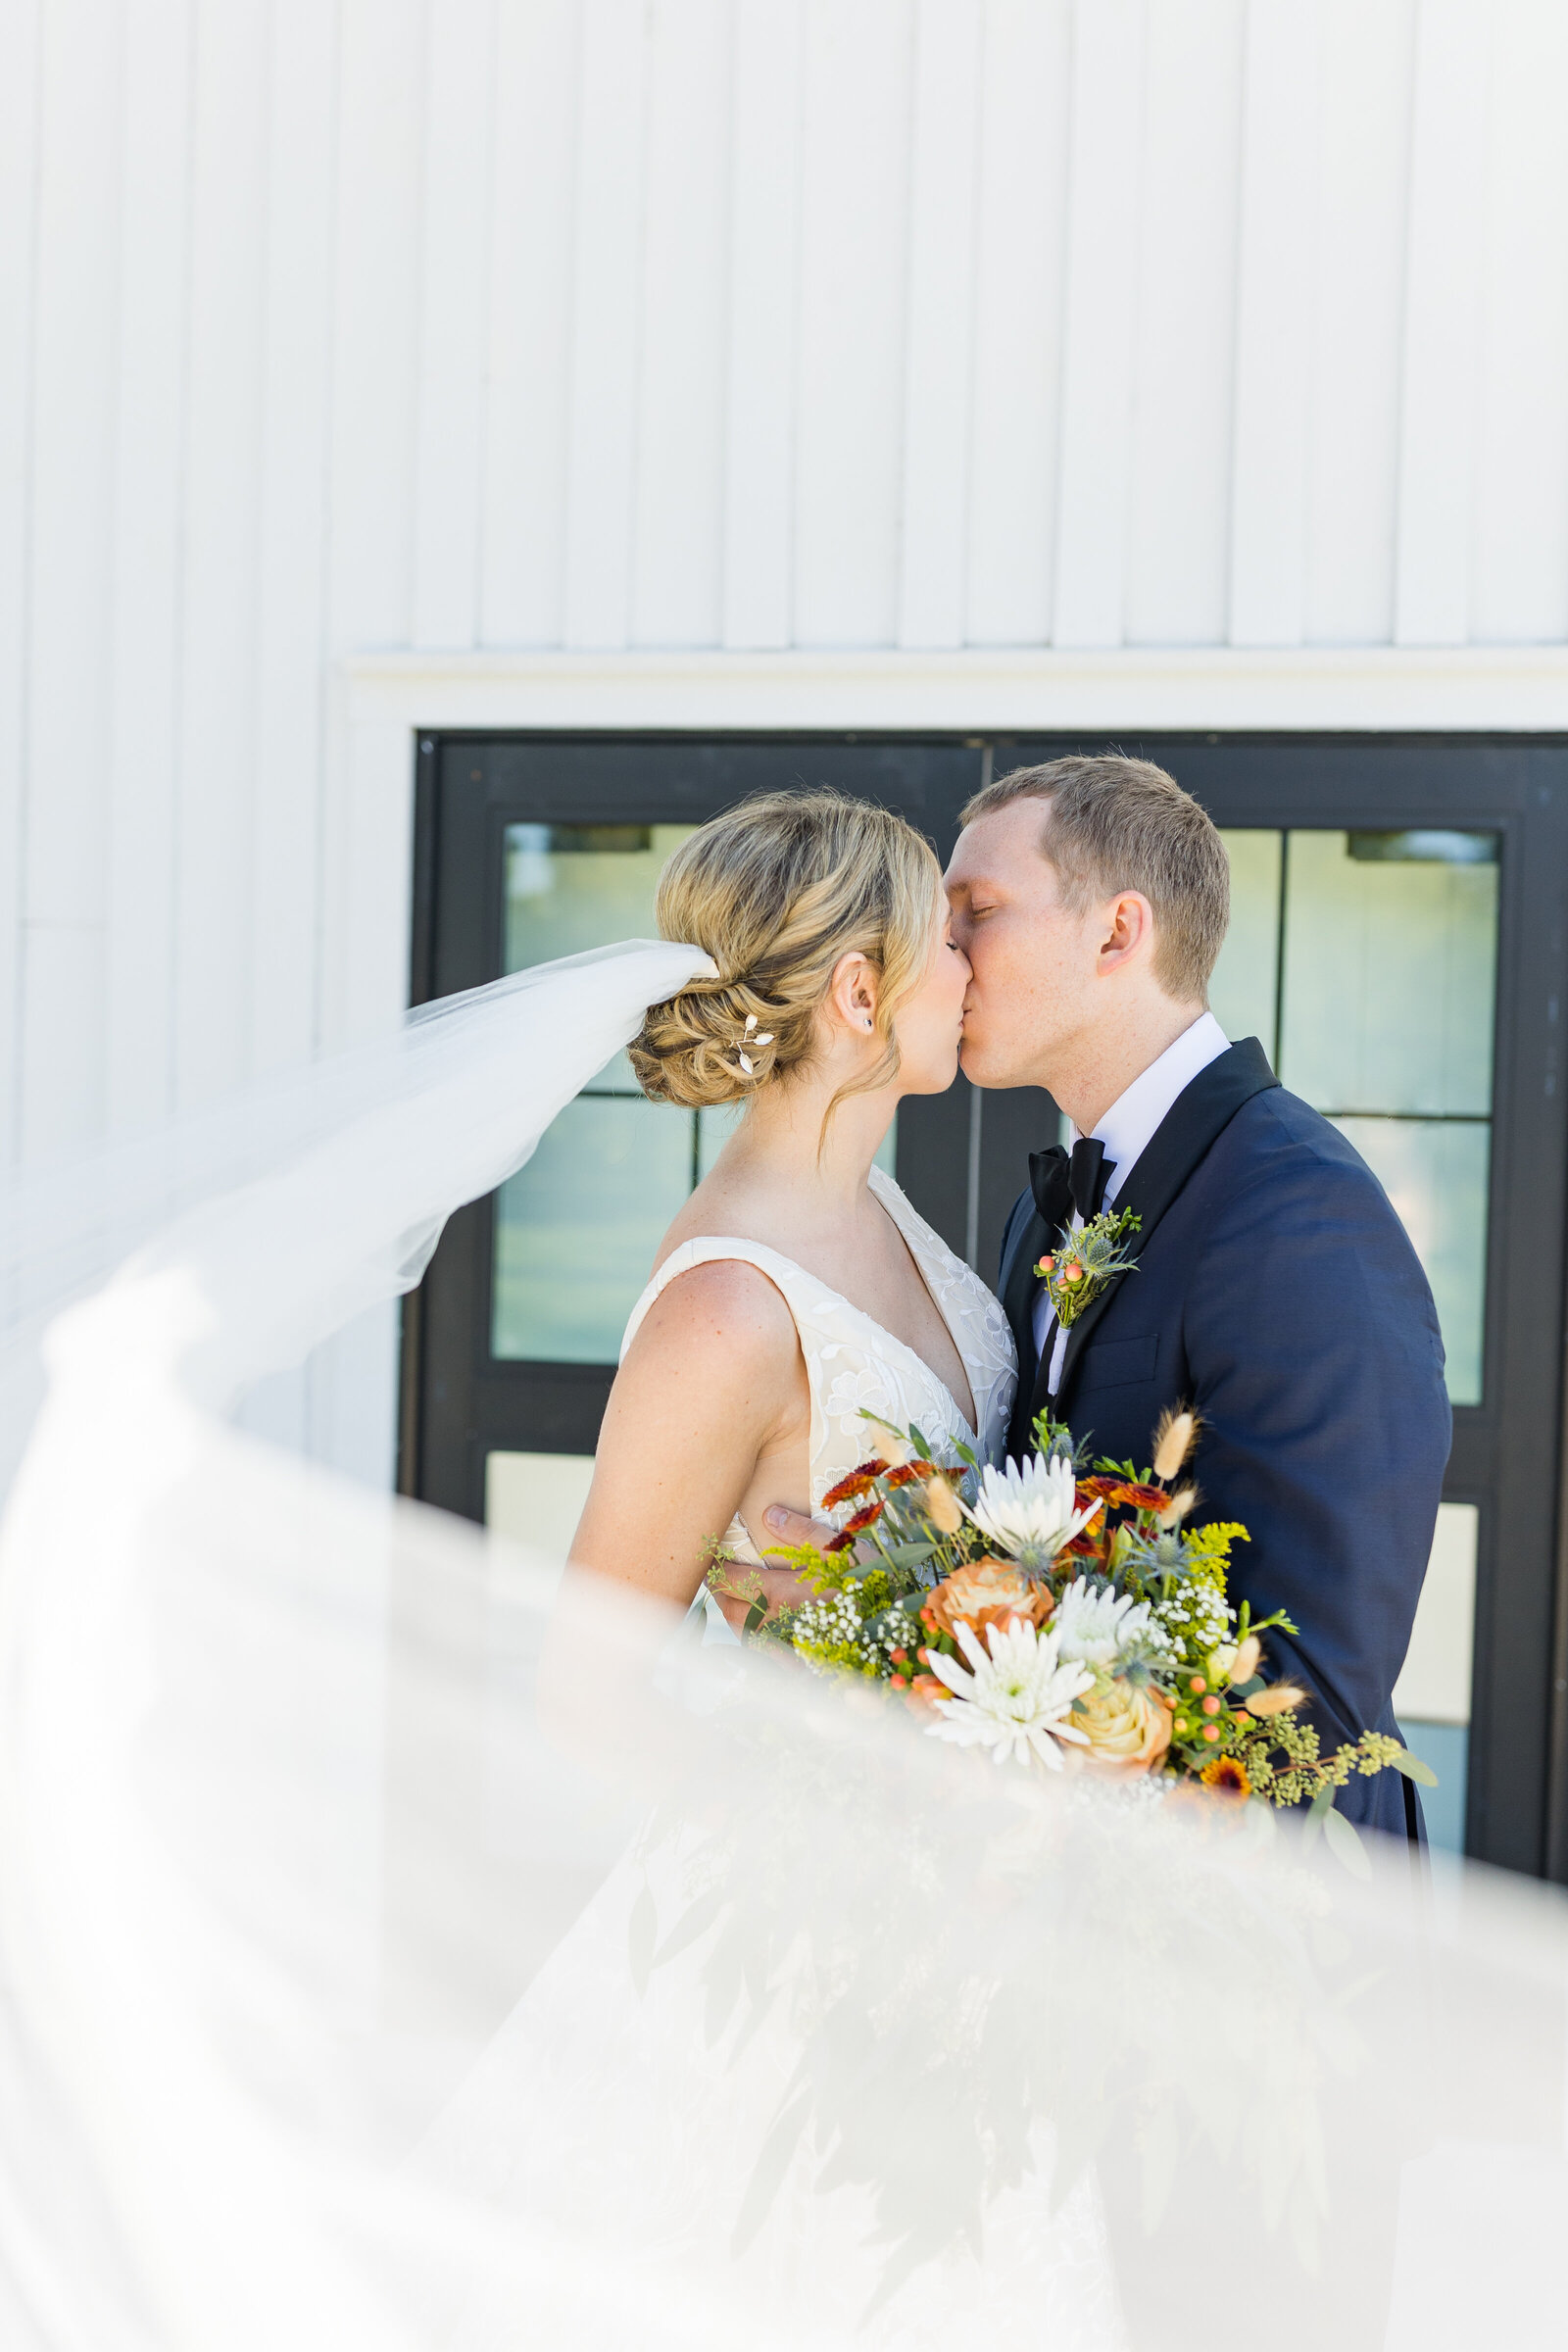 Midwest Based Timeless Wedding & Elopement Photographer